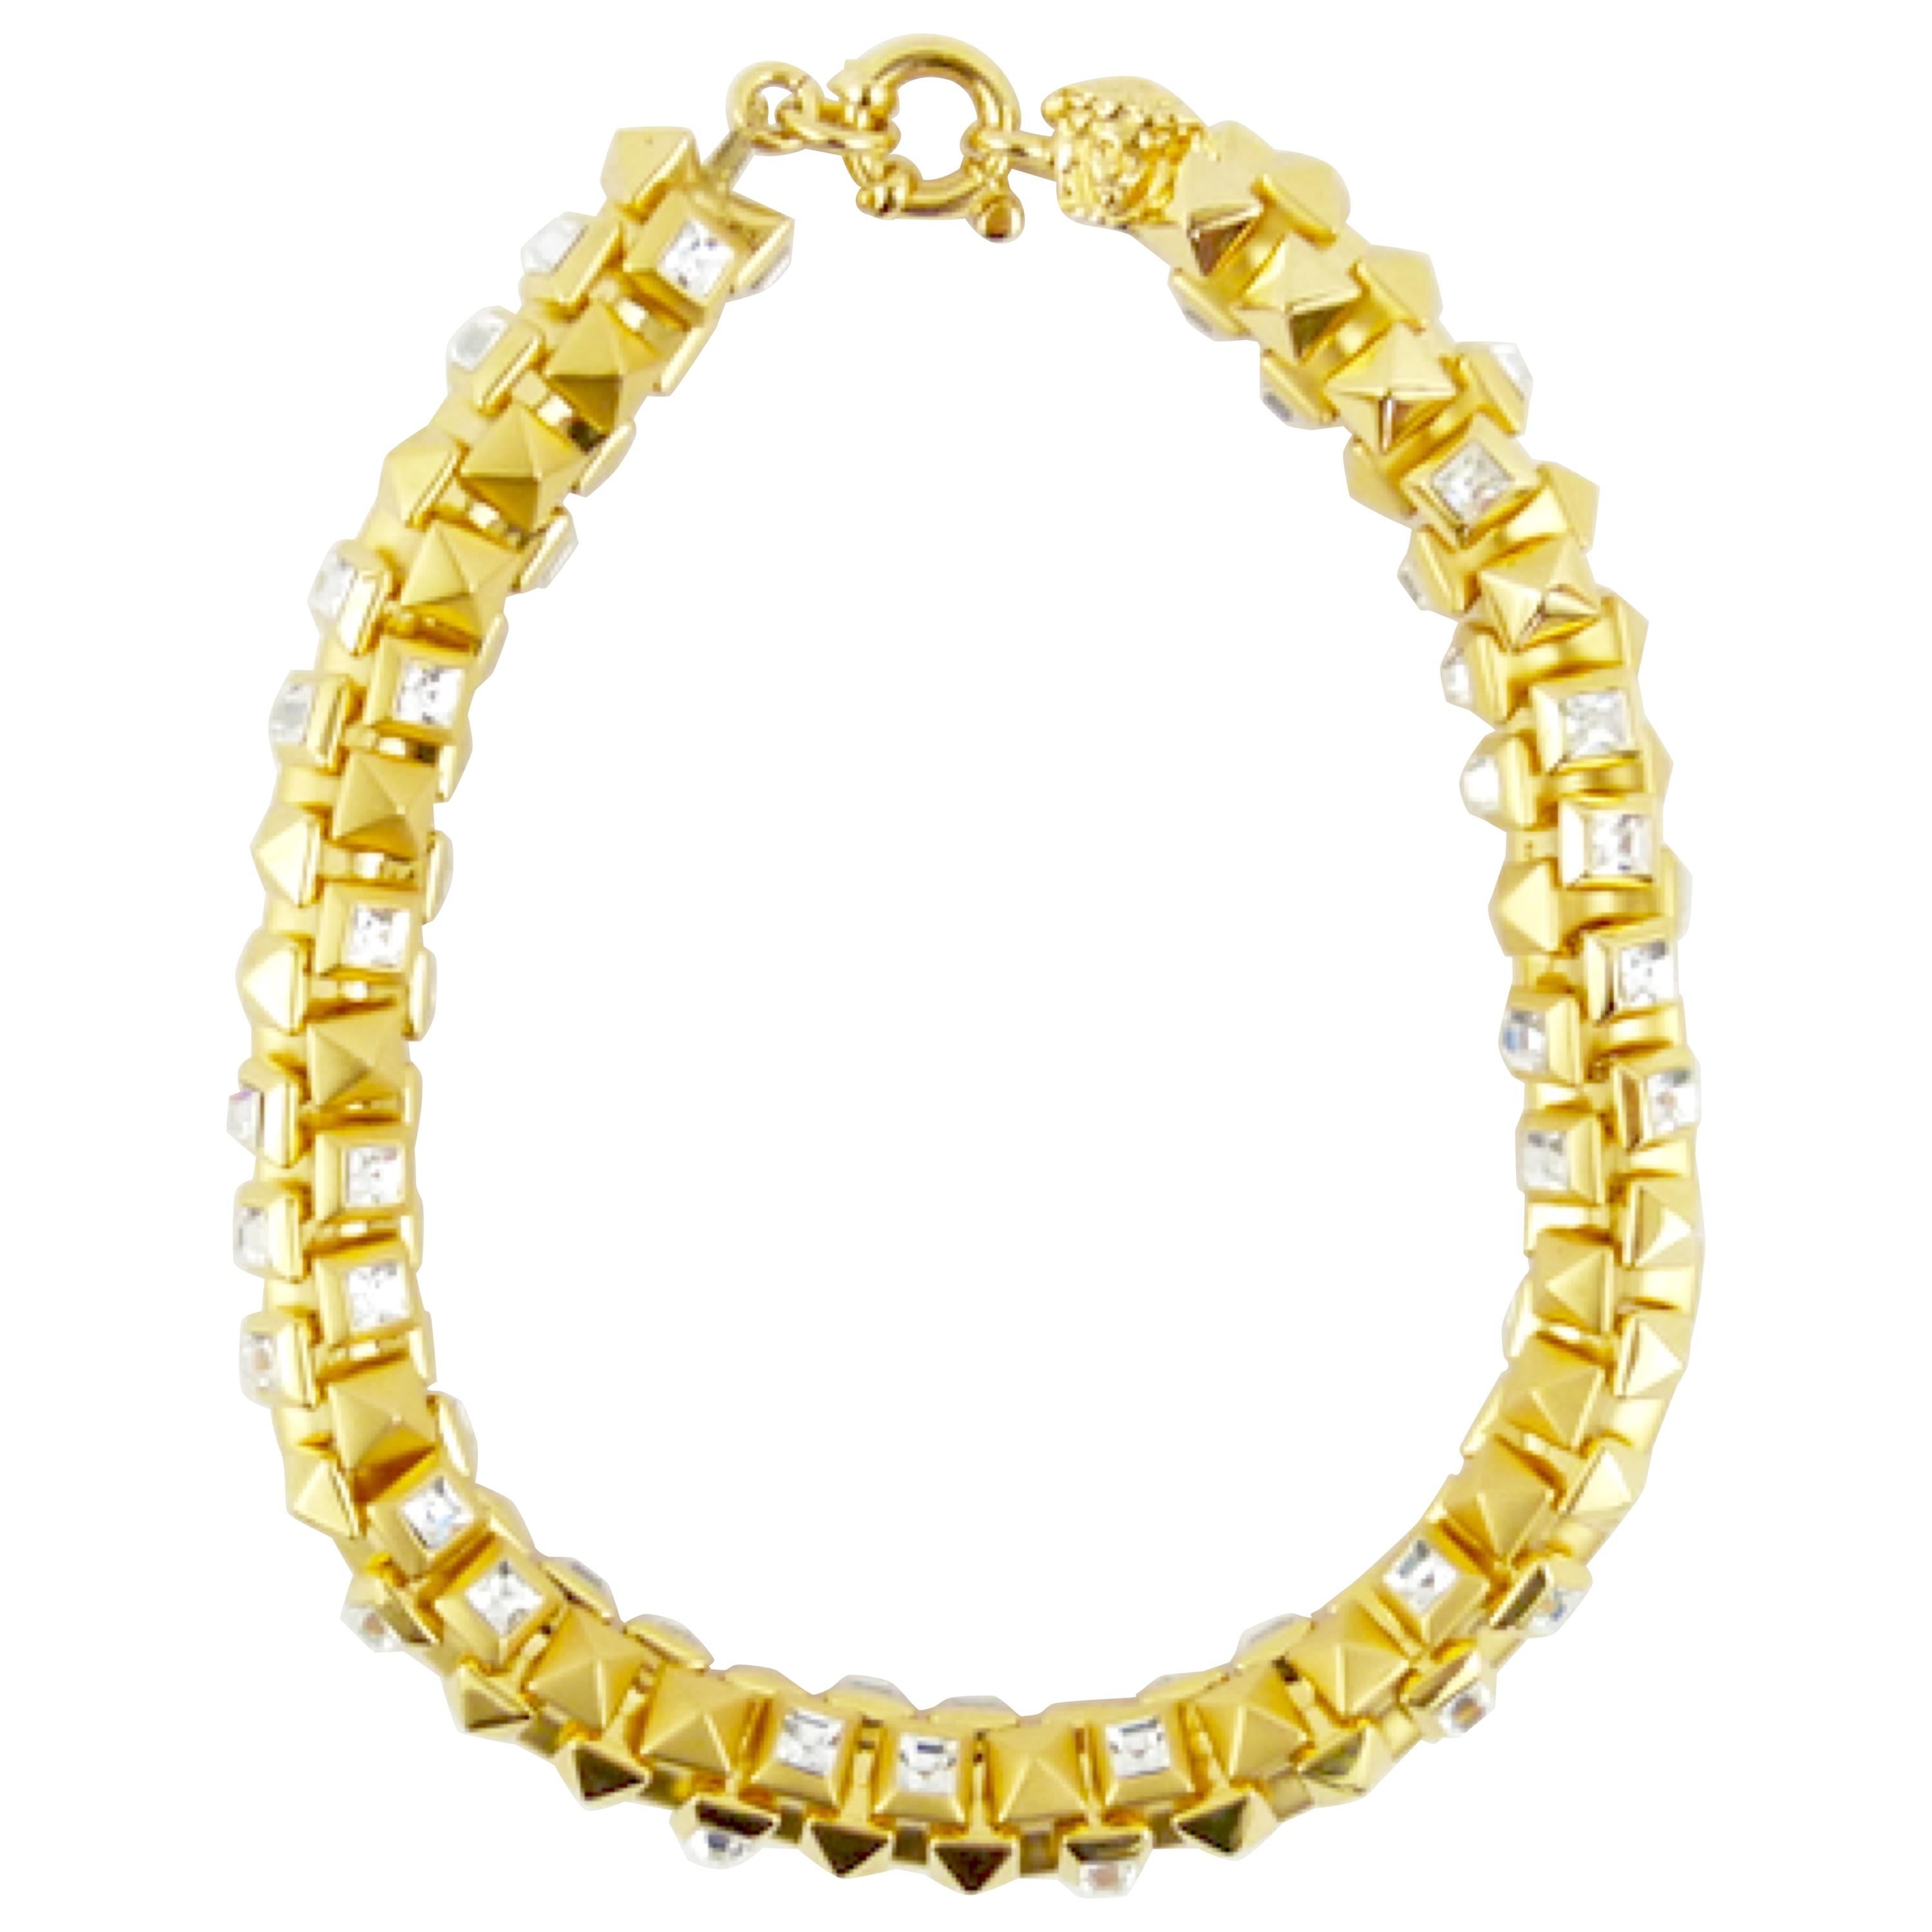 Gianni Versace 1990s gold stud and stone choker necklace For Sale